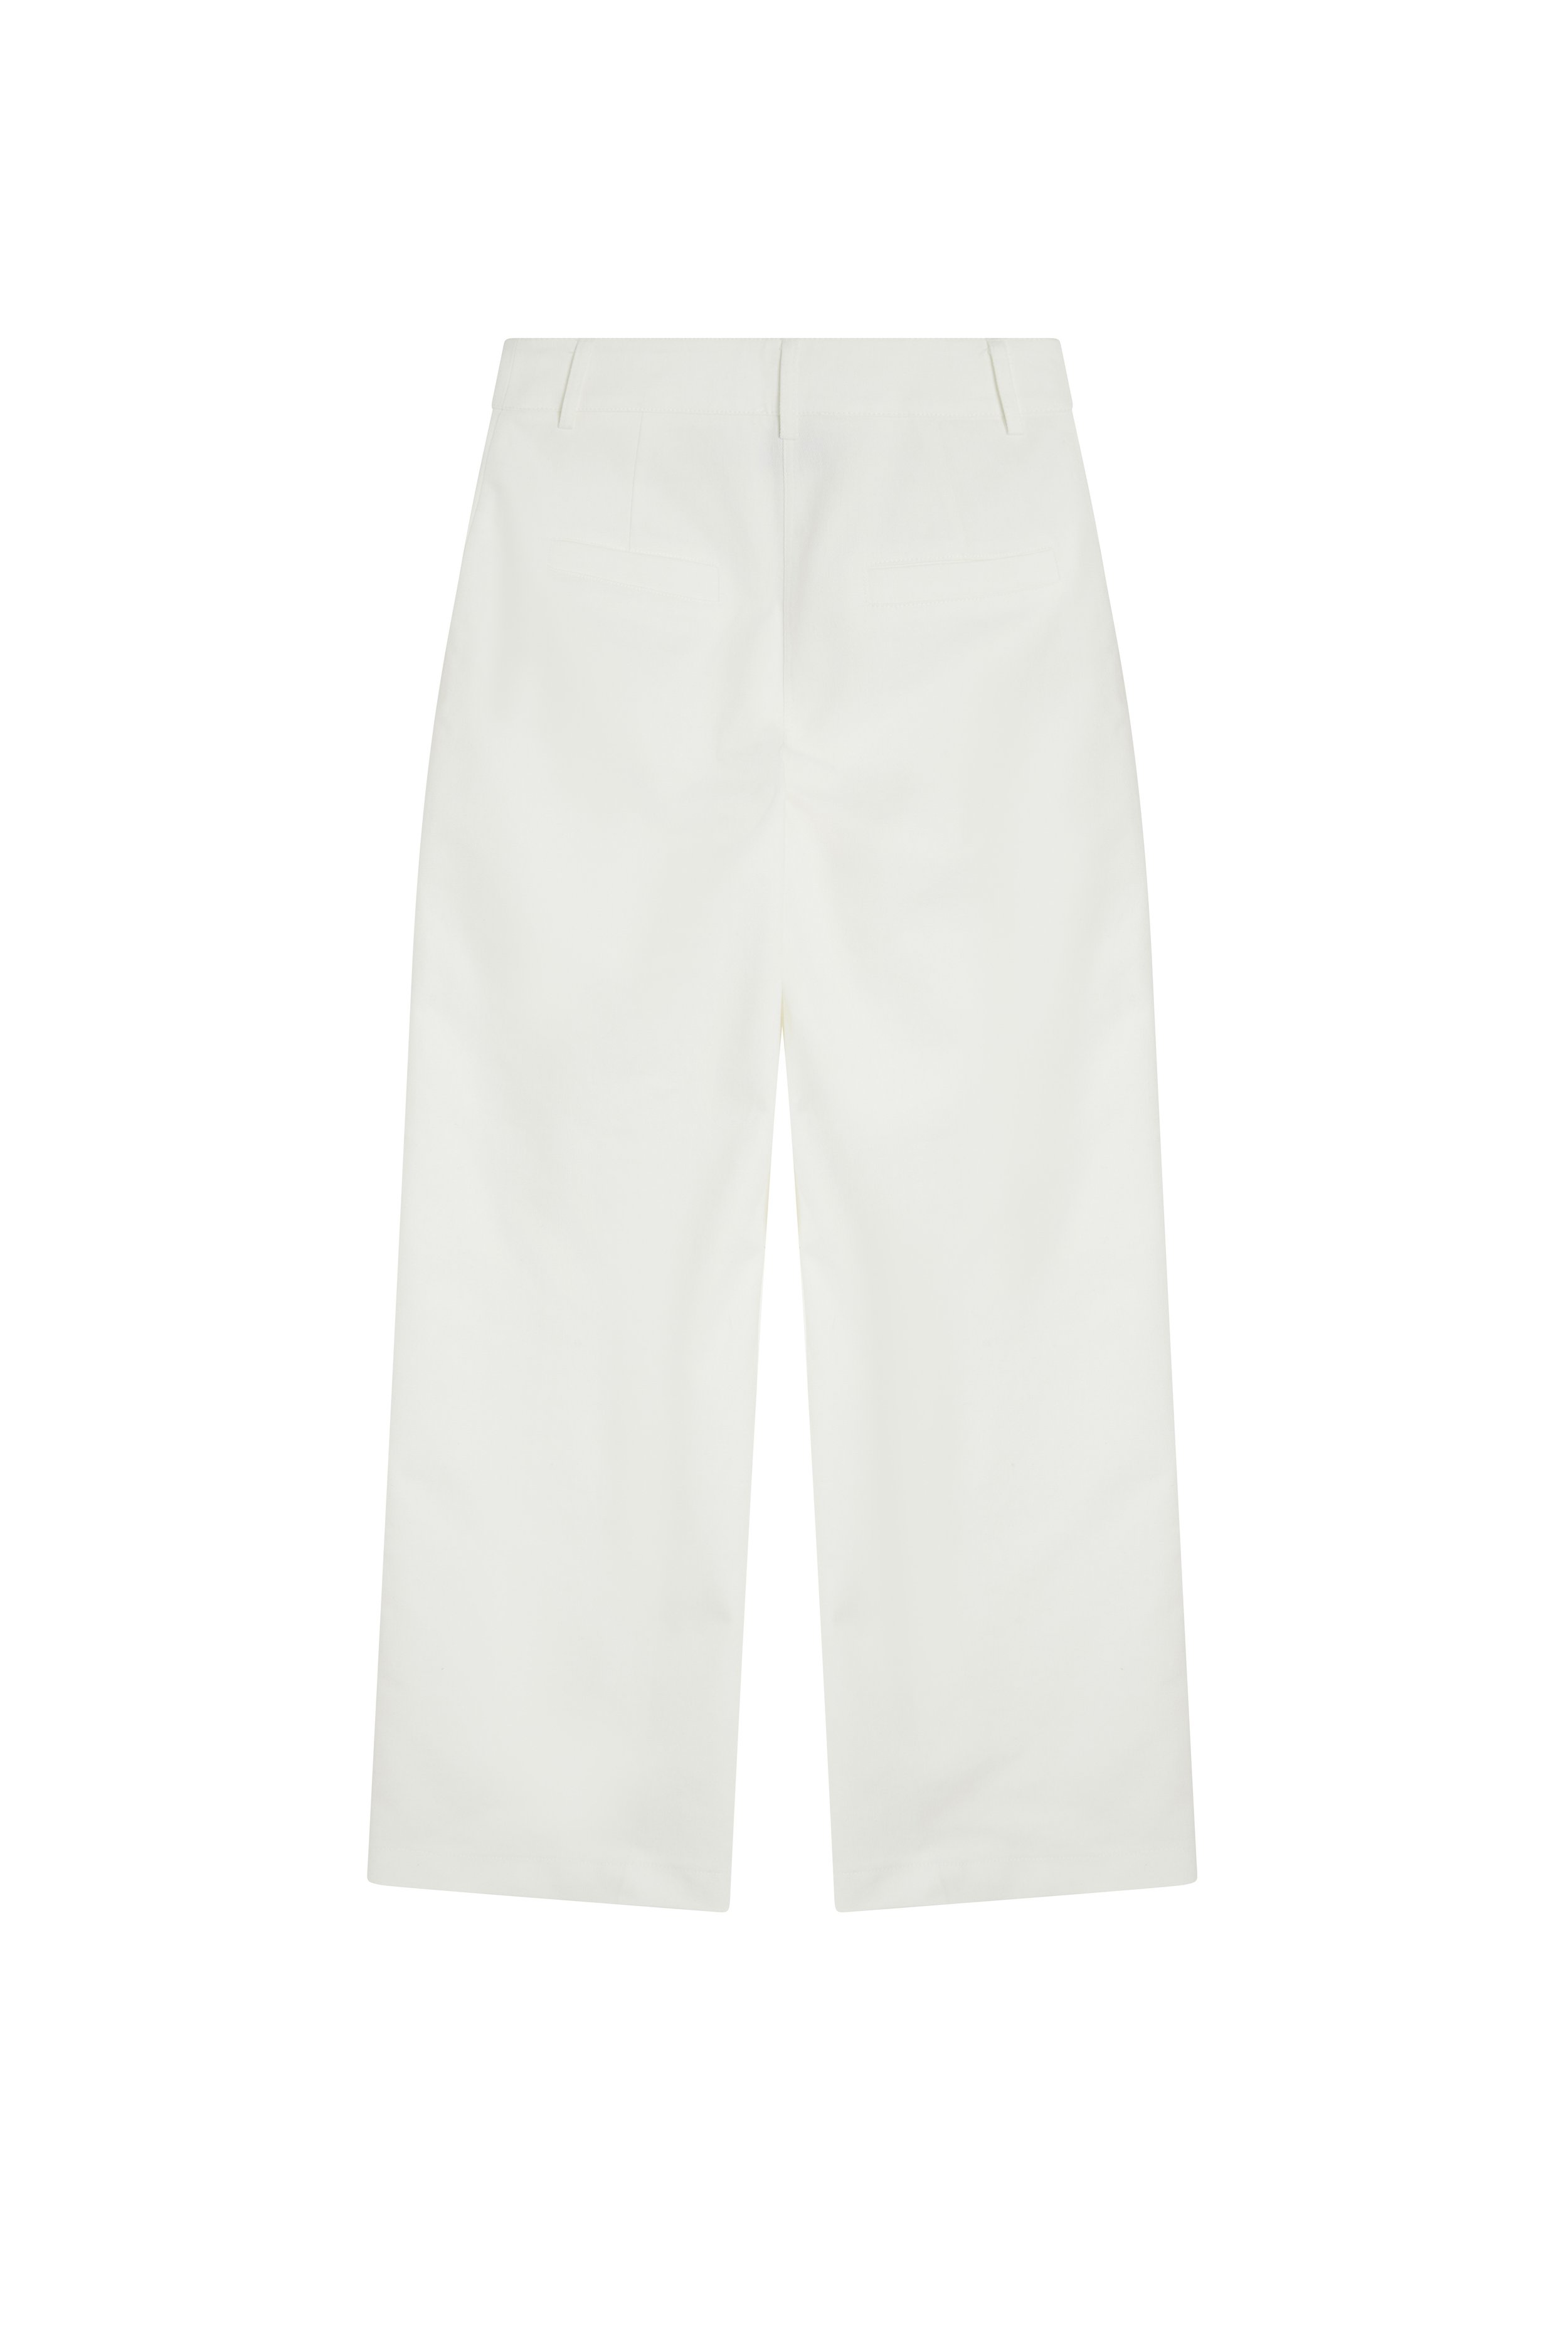 Le Jean - The Sculptural Most Flattering Pants with Oversized Pockets ...